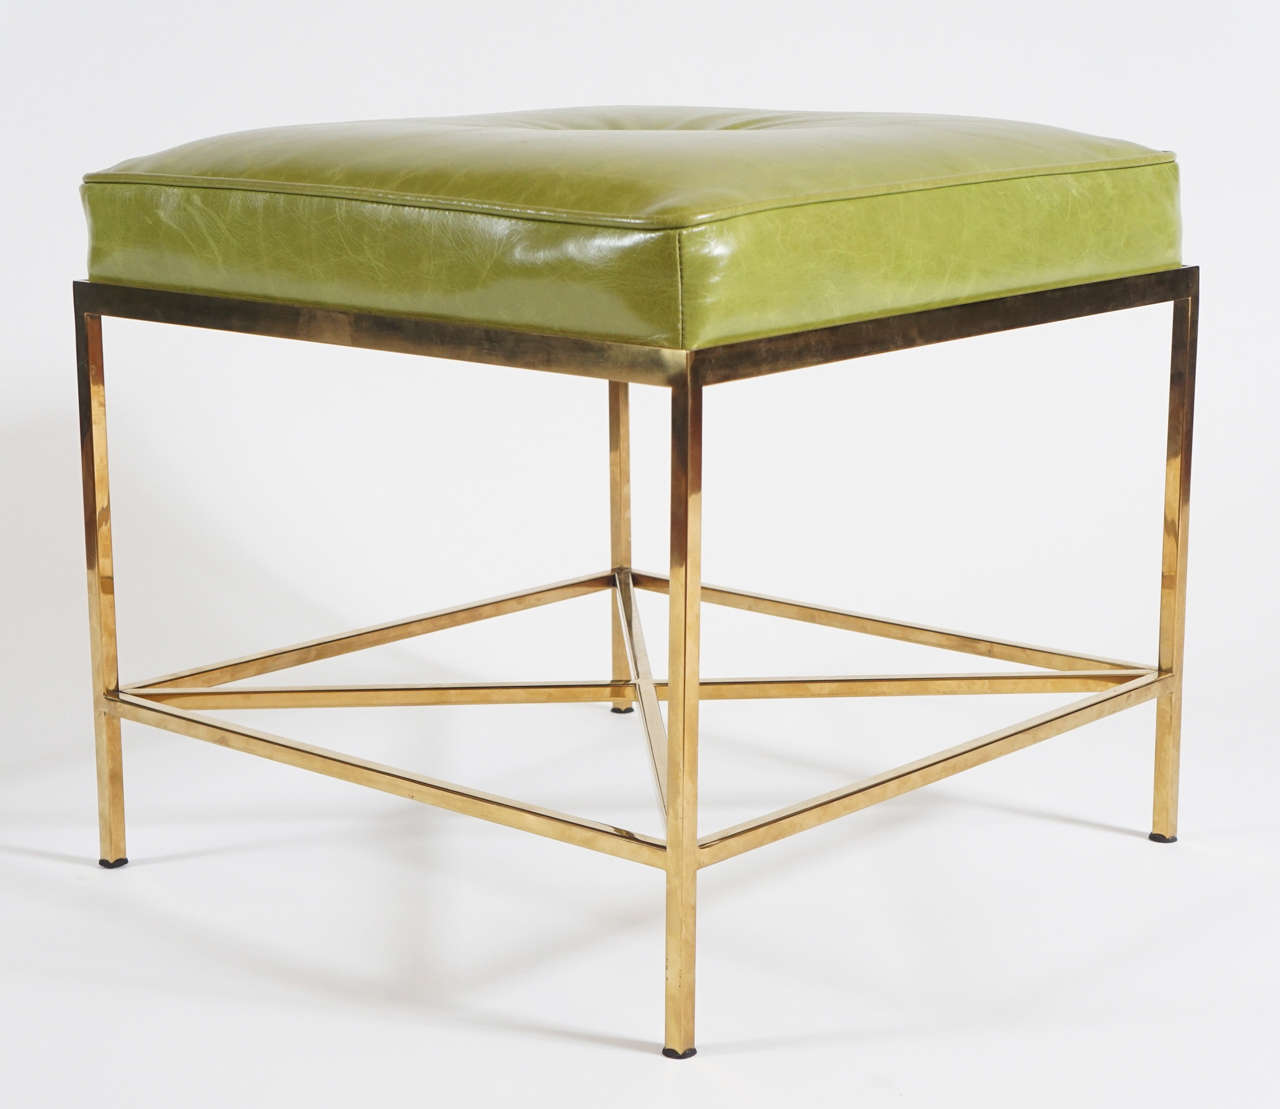 Late 20th Century Vintage Brass Paul McCobb Style Leather Upholstered Stools